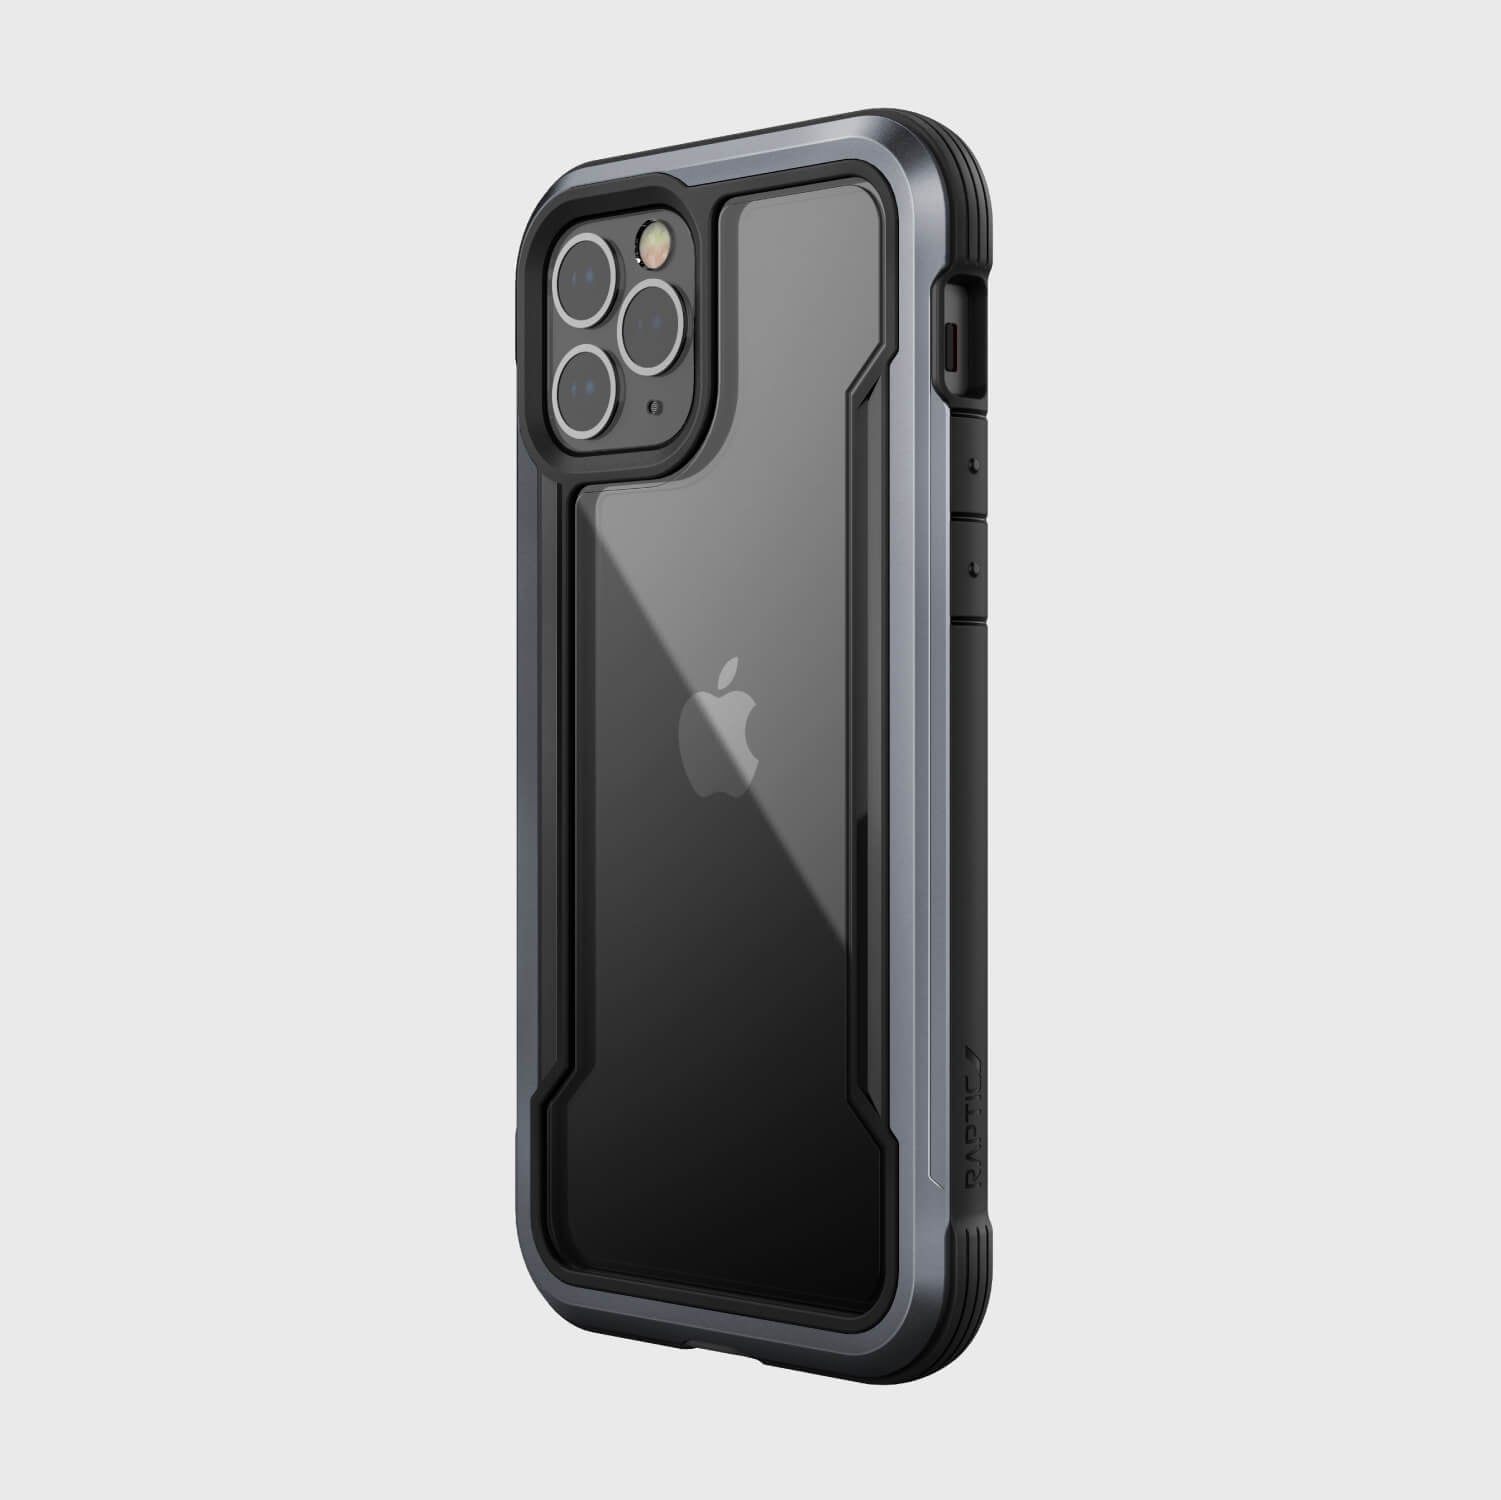 The back of the Raptic iPhone 12 & iPhone 12 Pro Case - SHIELD is shown, providing protection for the device.